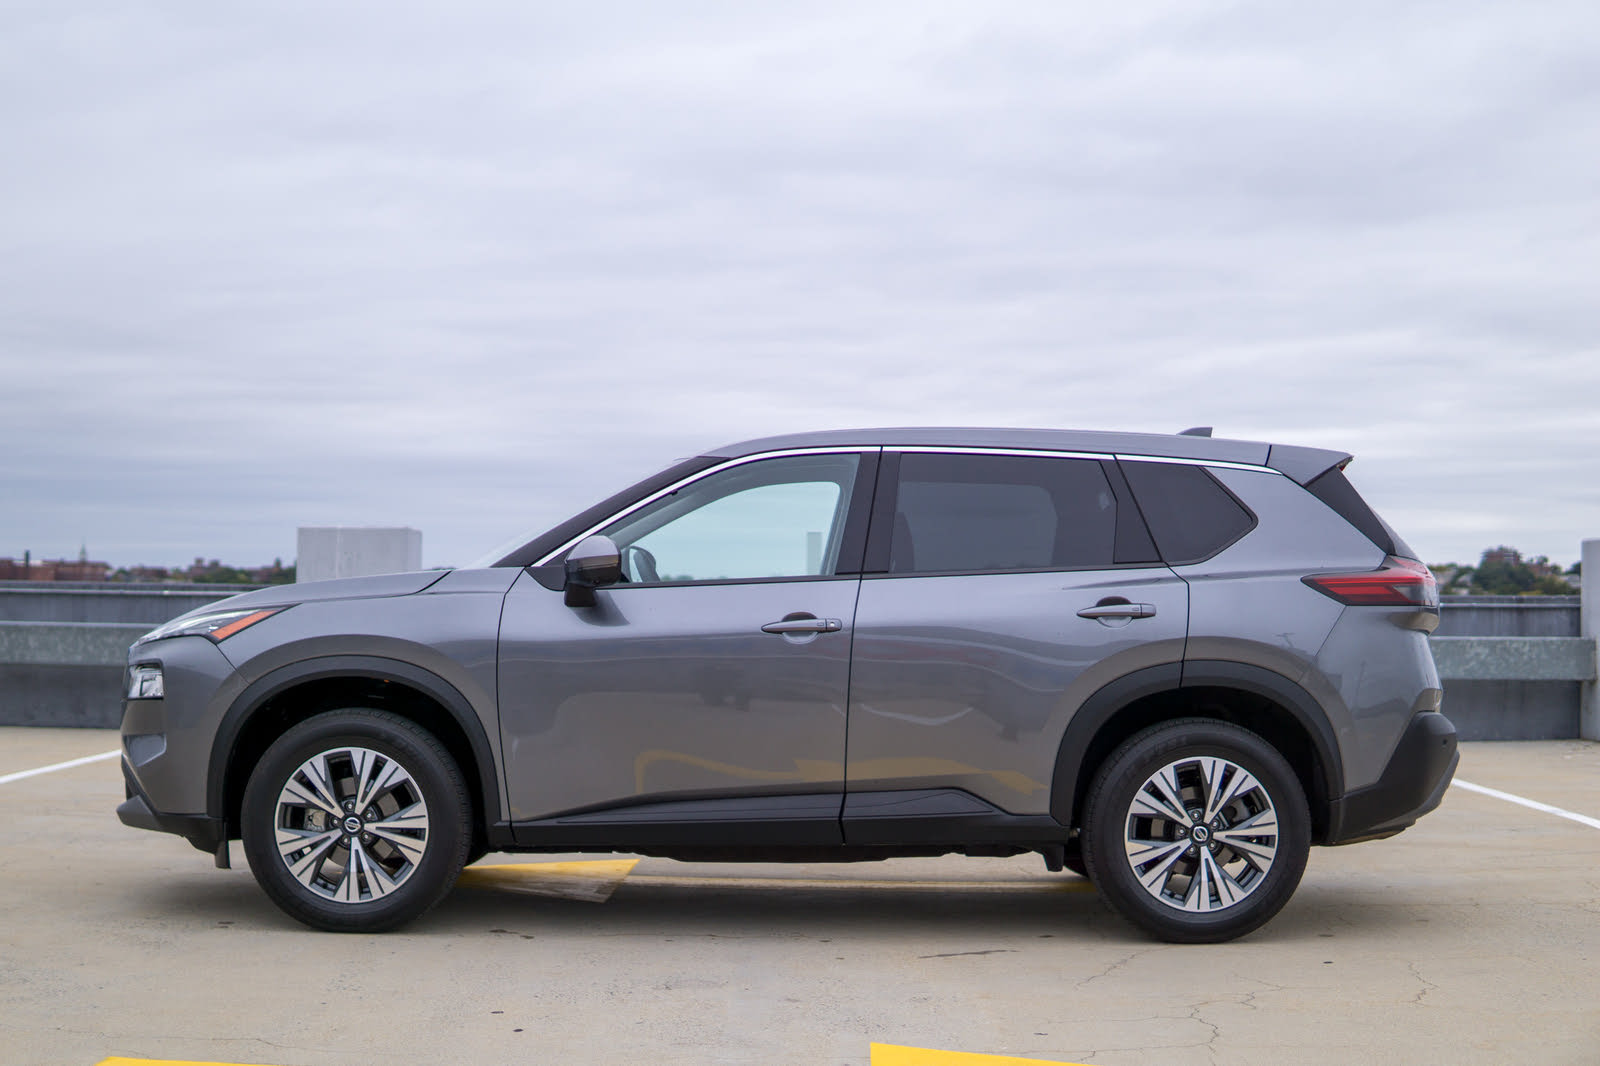 2021 Nissan Rogue Test Drive Review summaryImage